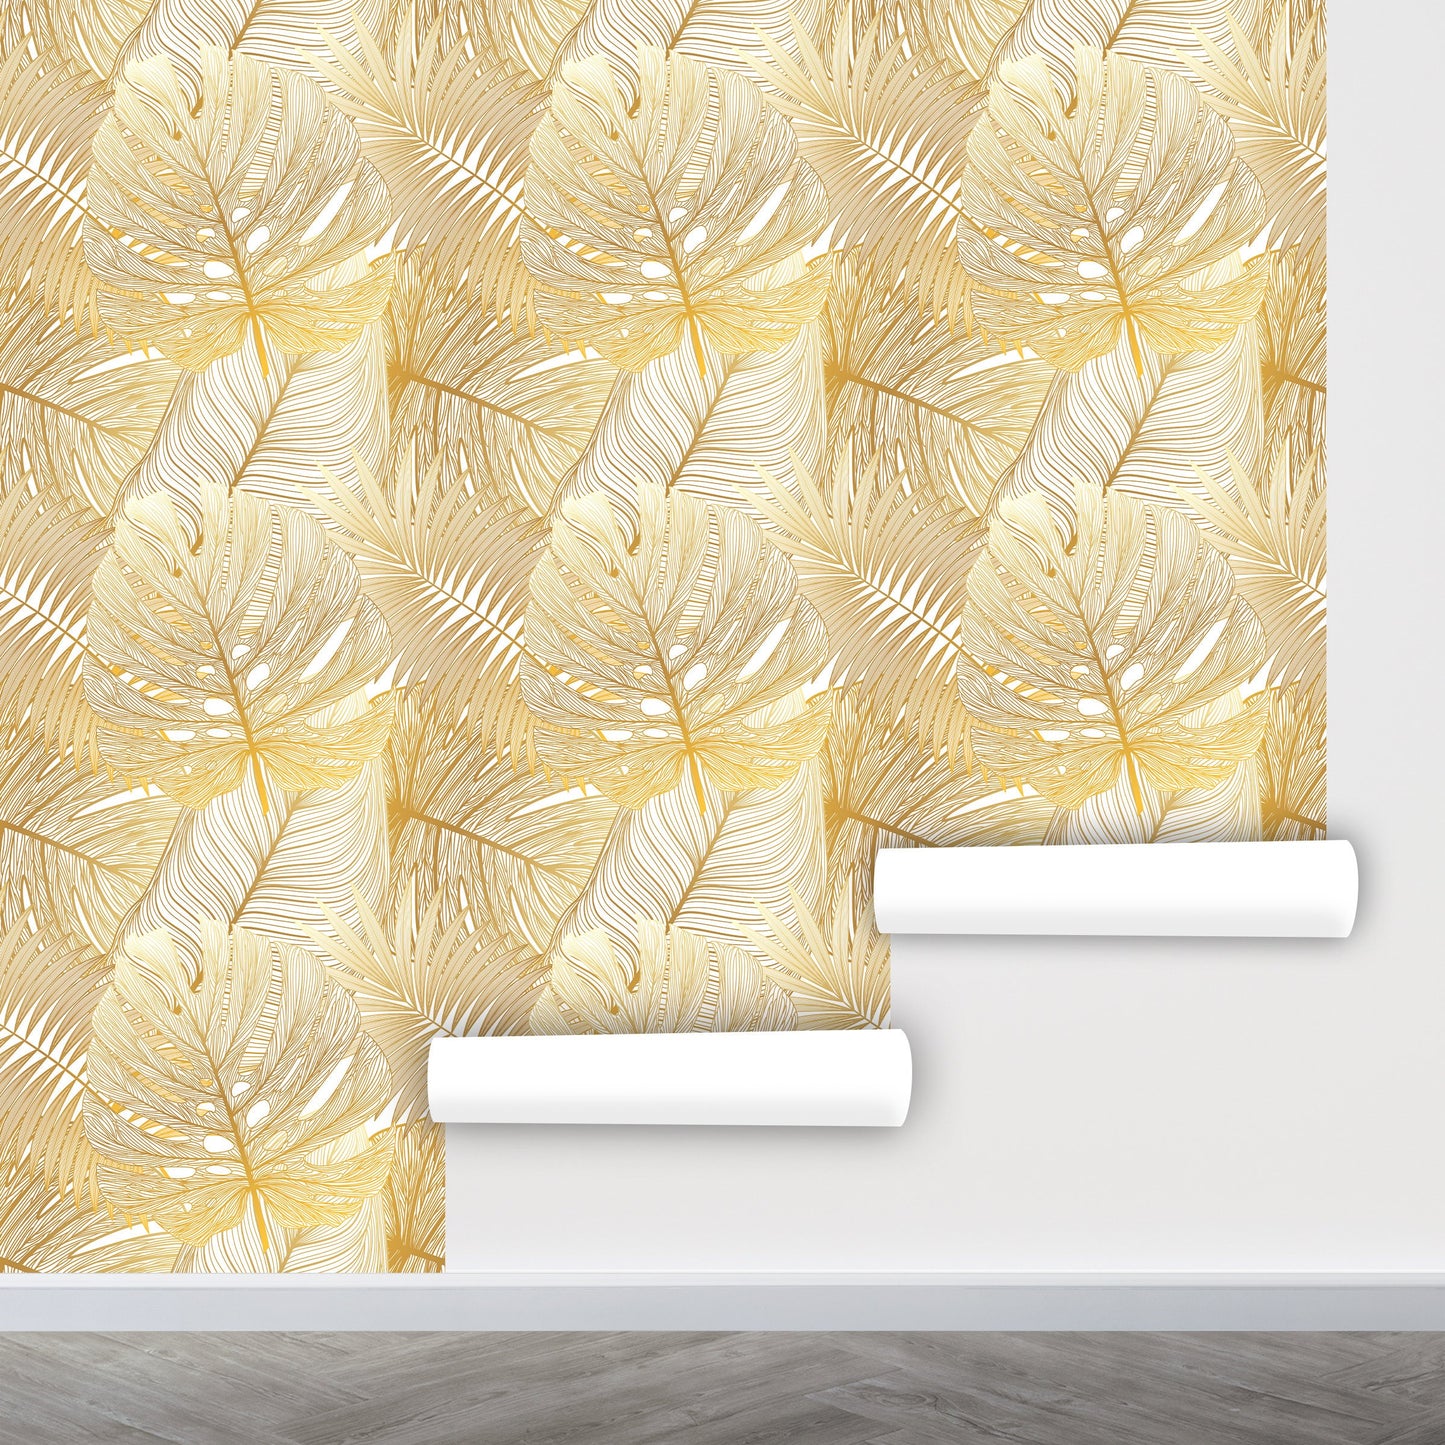 Gold Leaf Wallpaper Peel and Stick, Palm Leaf Wallpaper, Yellow Wallpaper, Self Adhesive Wallpaper, Removable Wall Paper